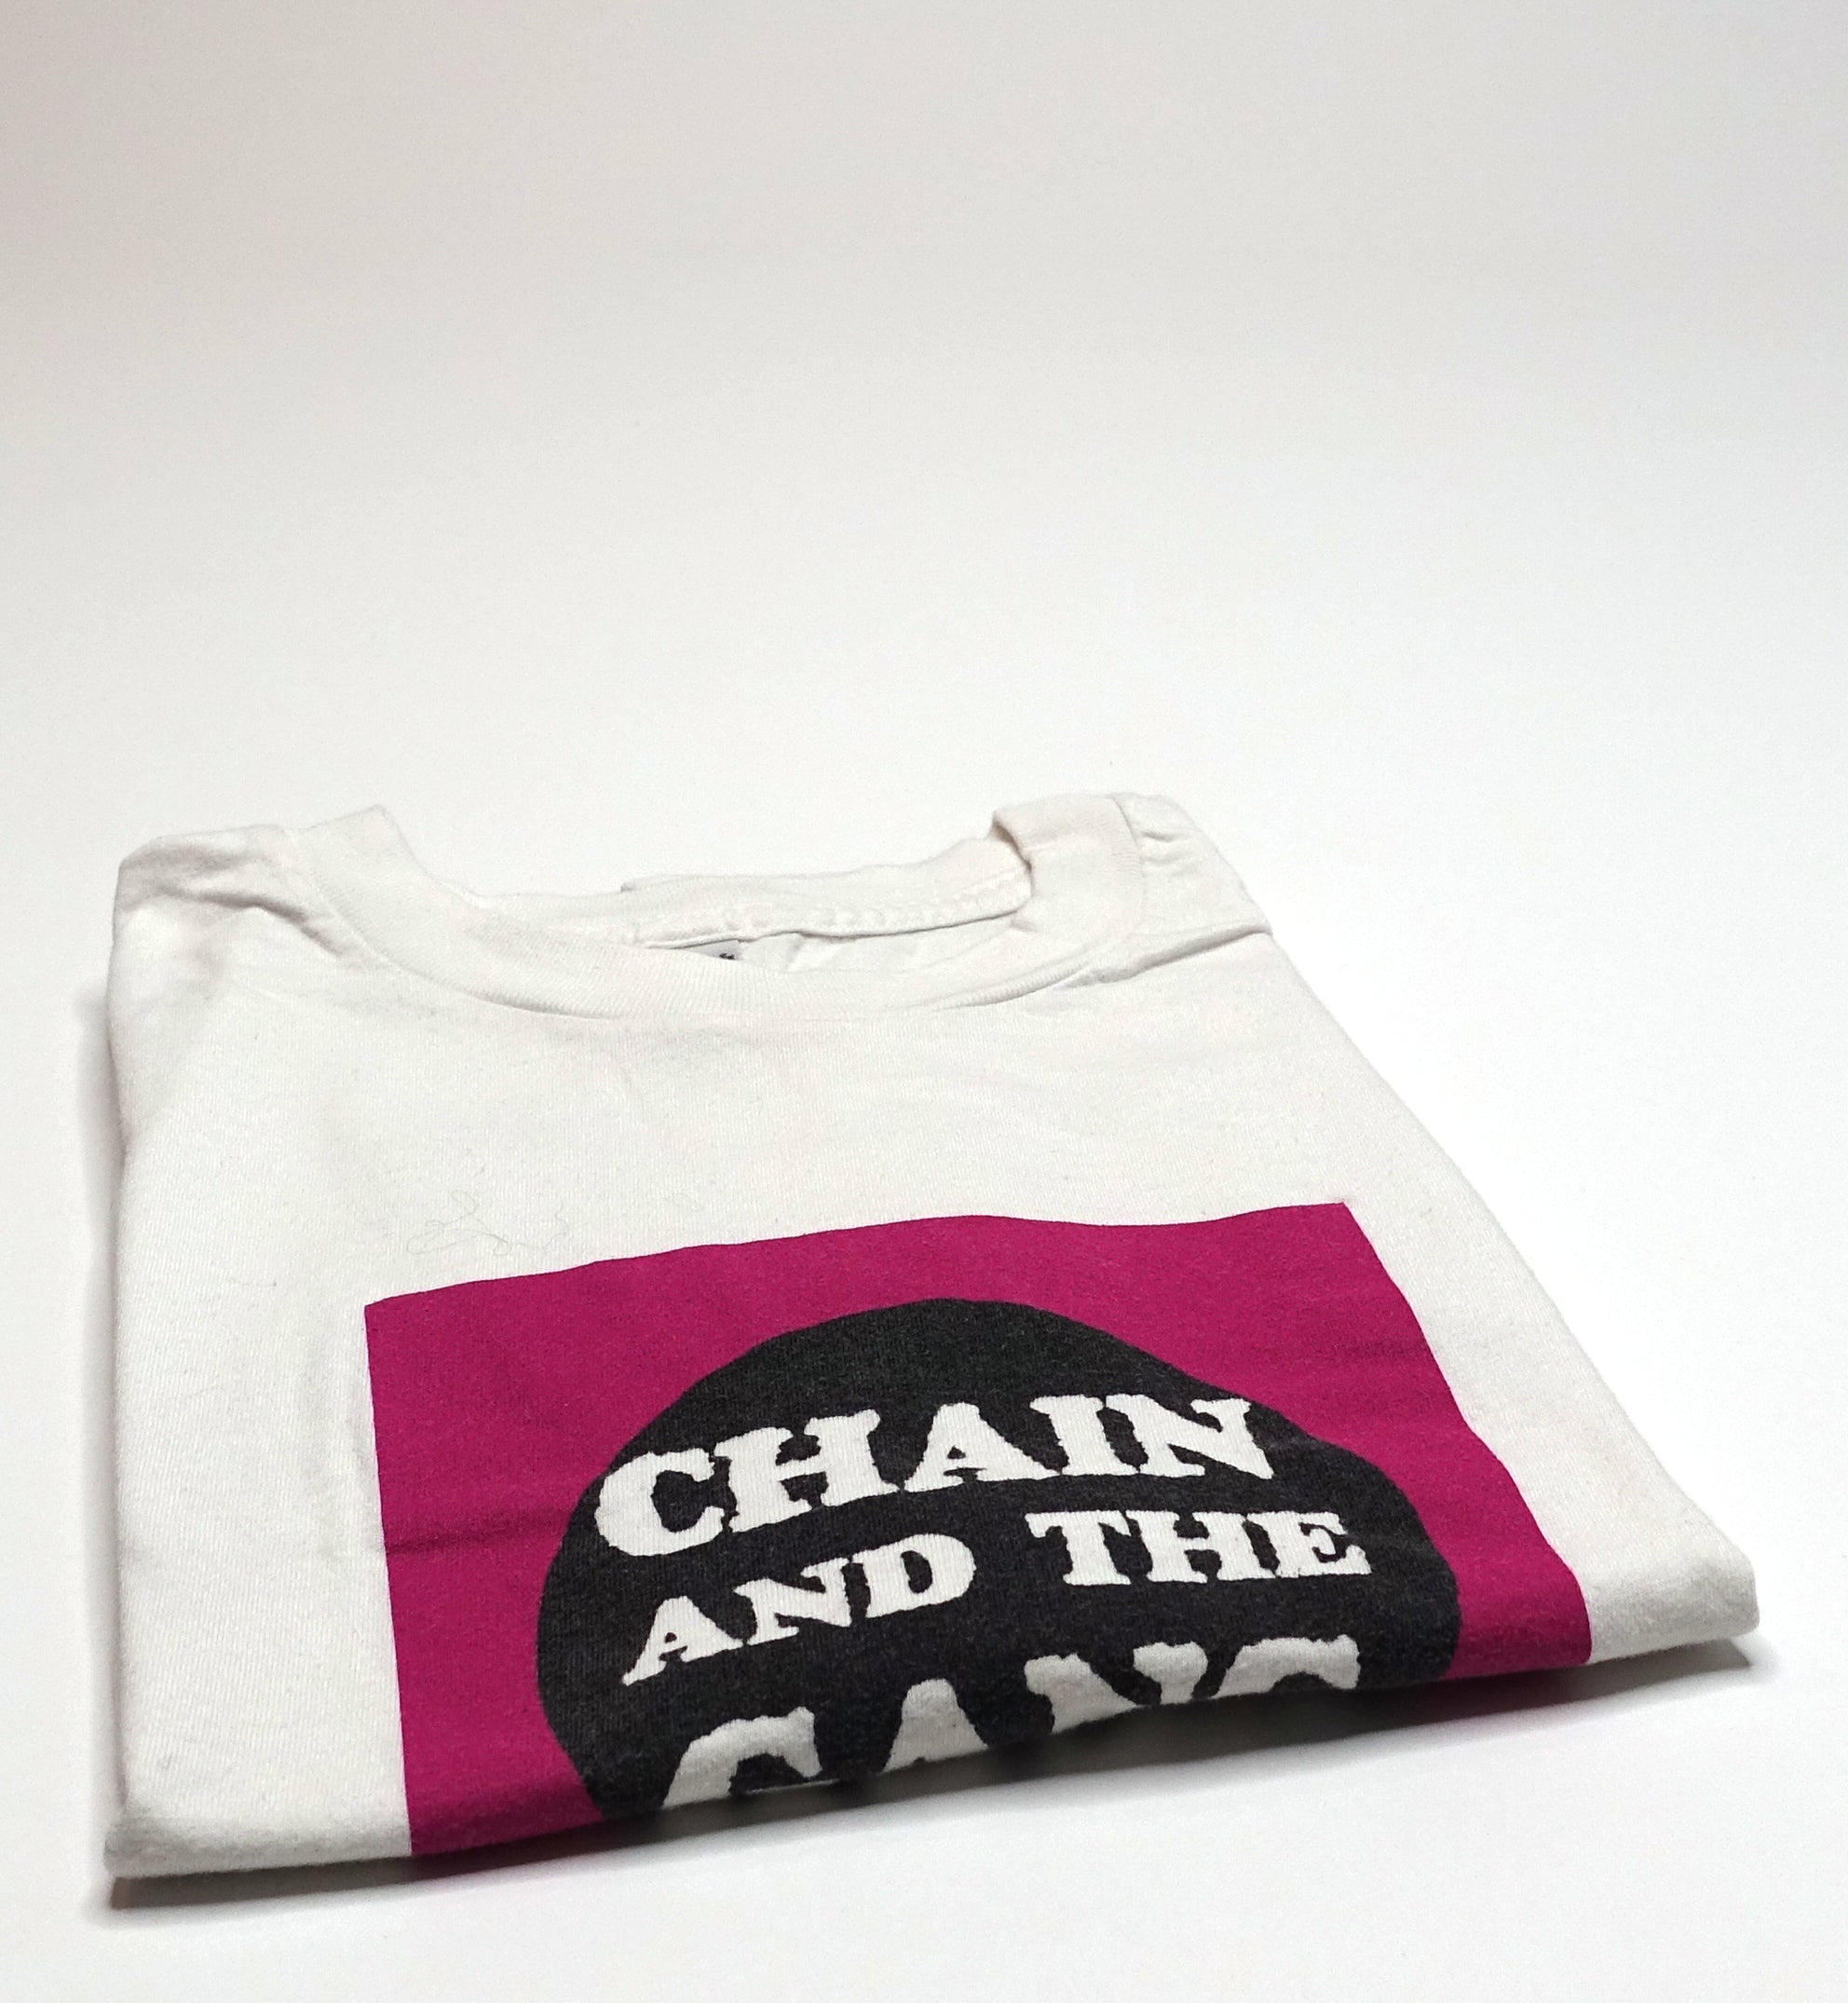 Chain And The Gang - Tour Shirt Size Small